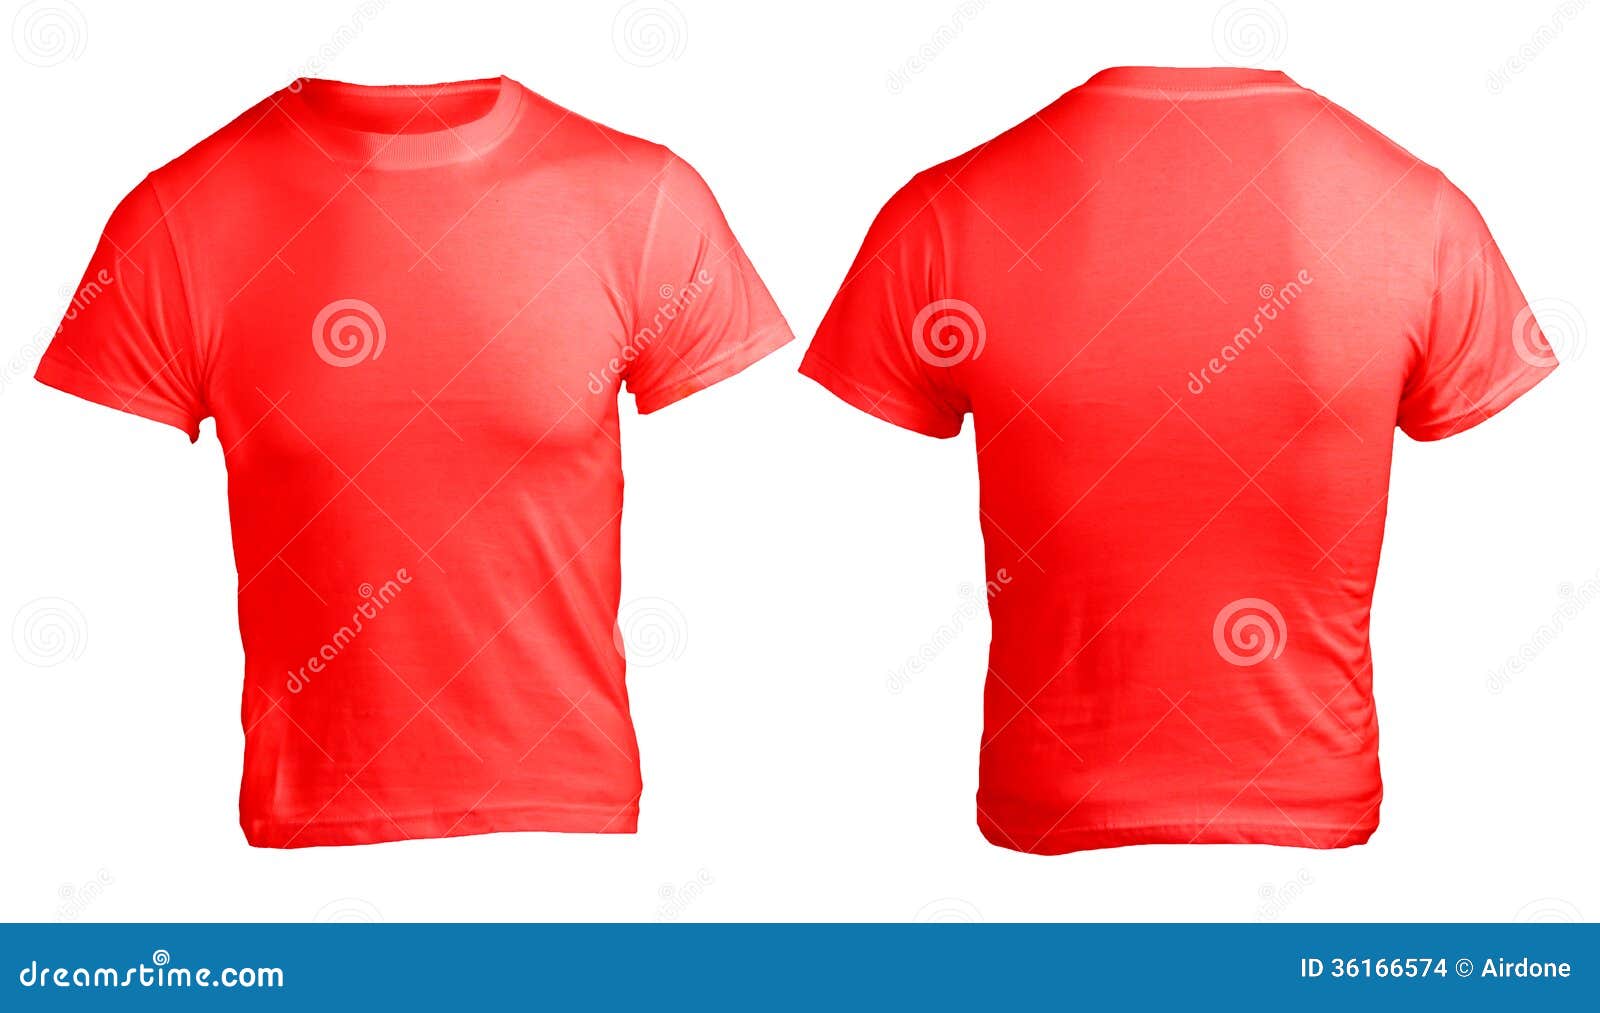 Men S Blank Red Shirt Template Stock Photo - Image of ...